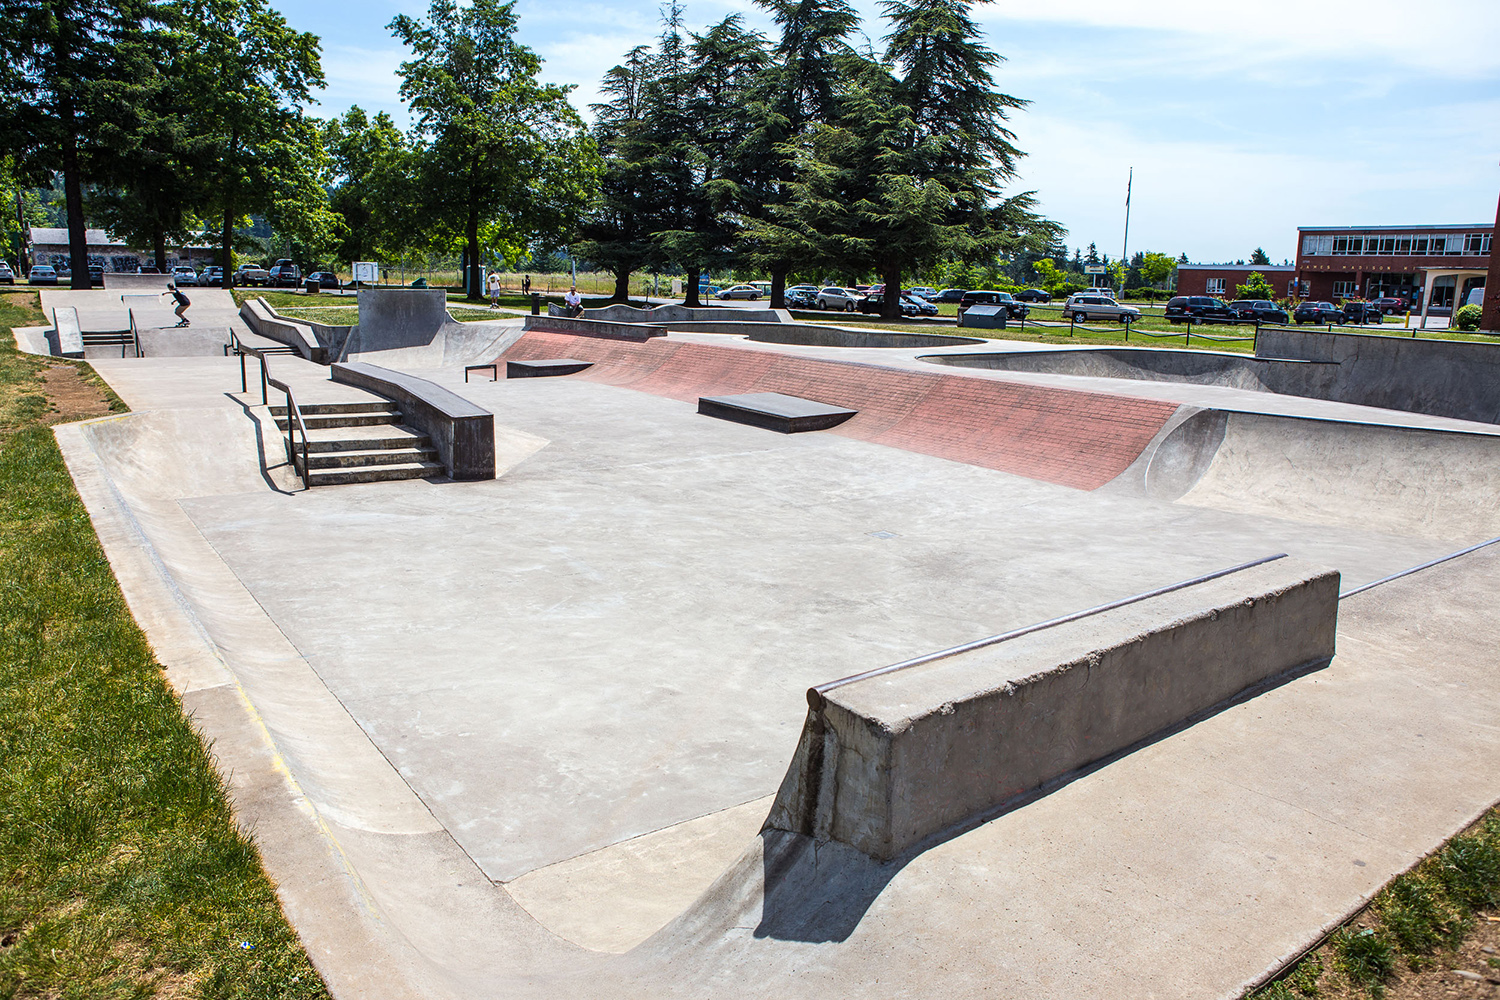  With its varied terrain and open street course area, Glenhaven Skatepark is particularly welcoming for beginning skateboarders. 